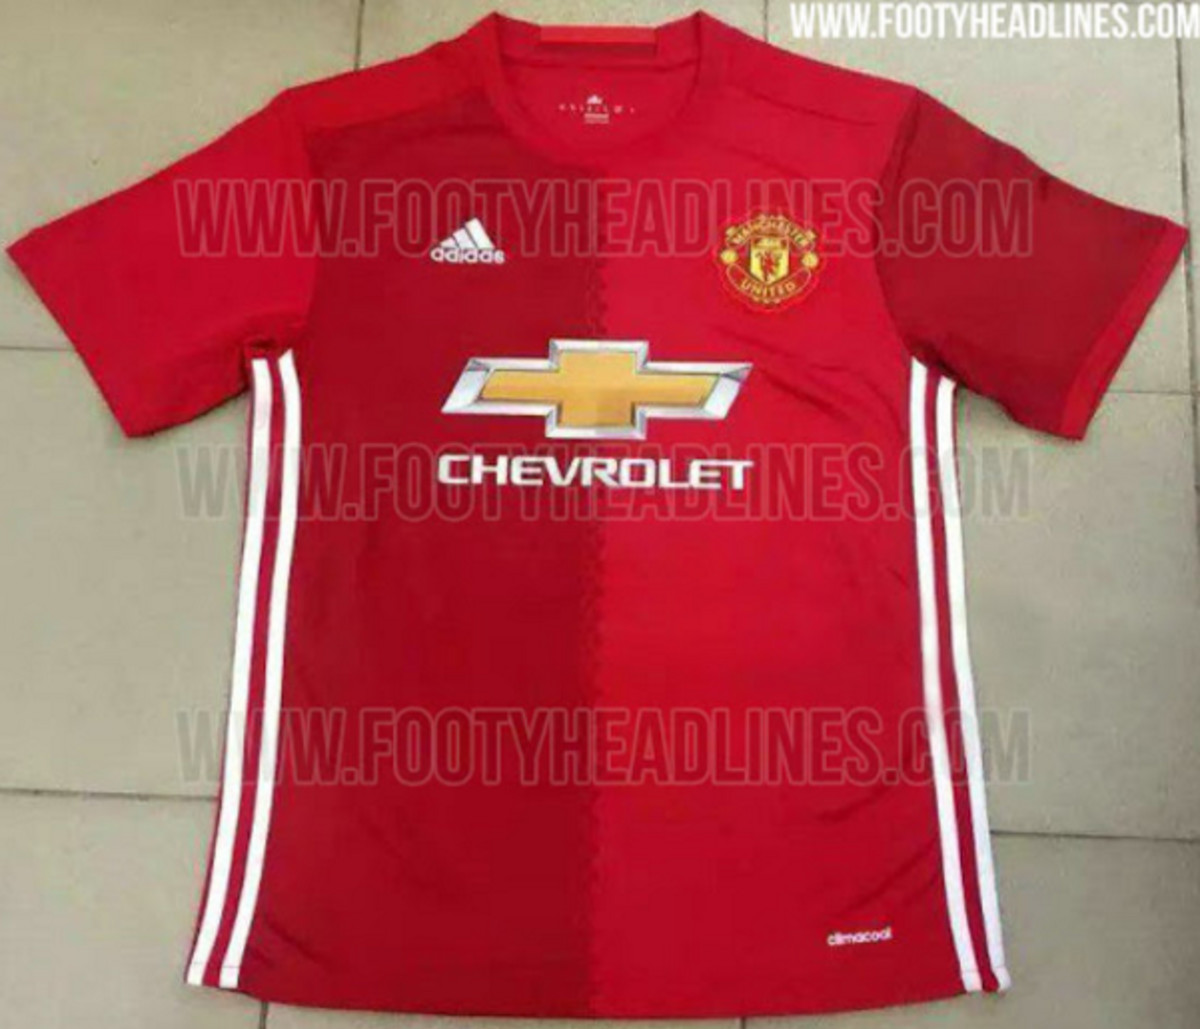 Here’s a First Look at What Could Be Manchester United’s Home Shirt for ...